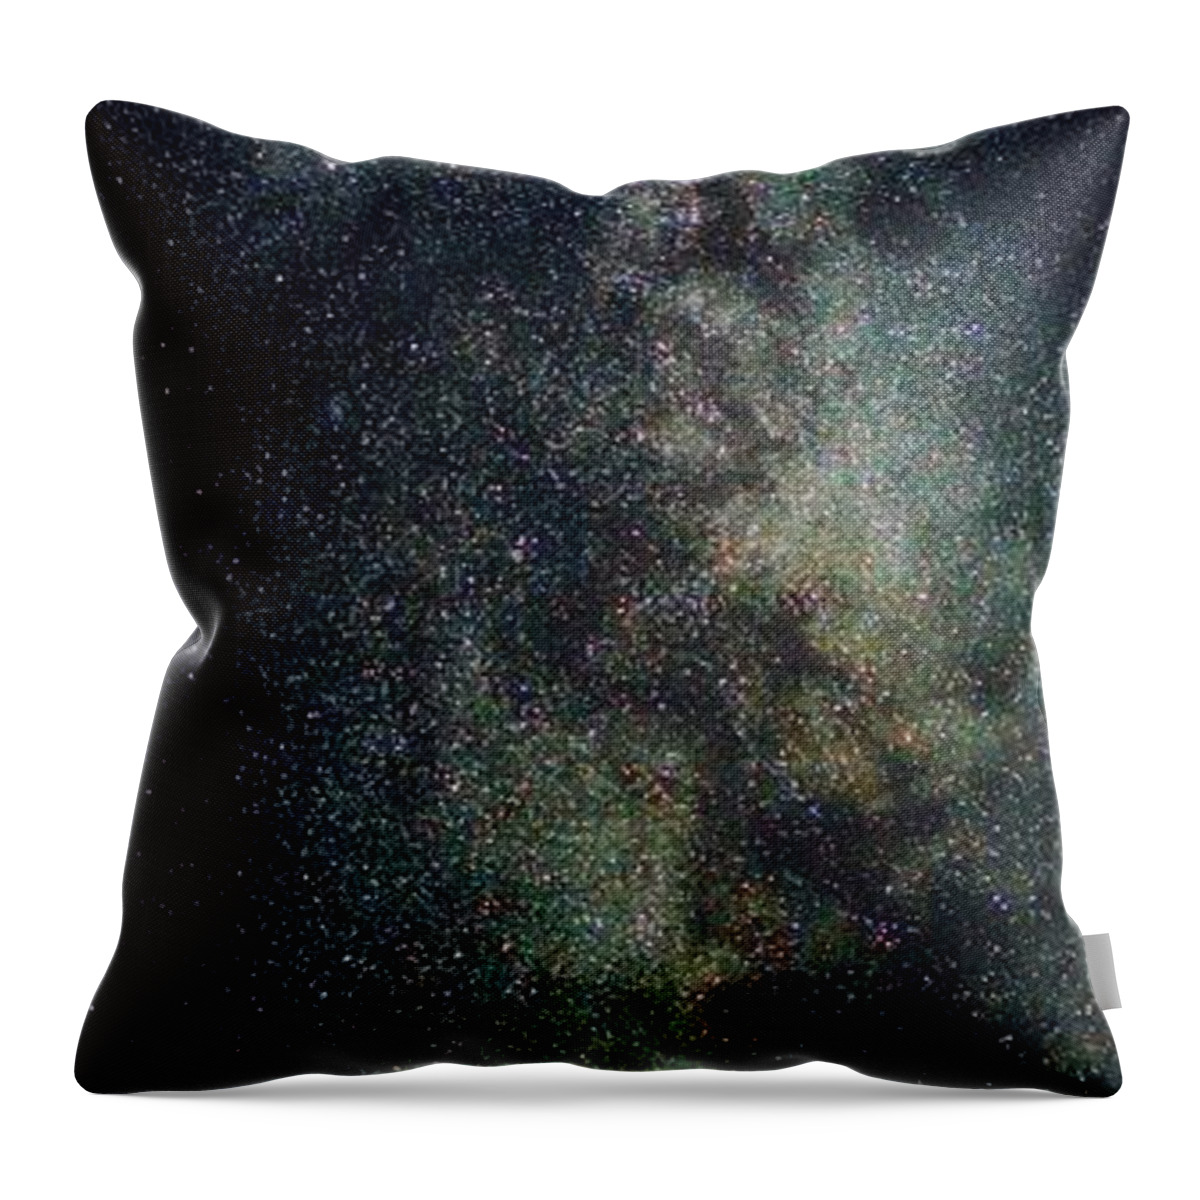 Milky Way Throw Pillow featuring the photograph Milky Way Panoramic by Jeremy Tamsen